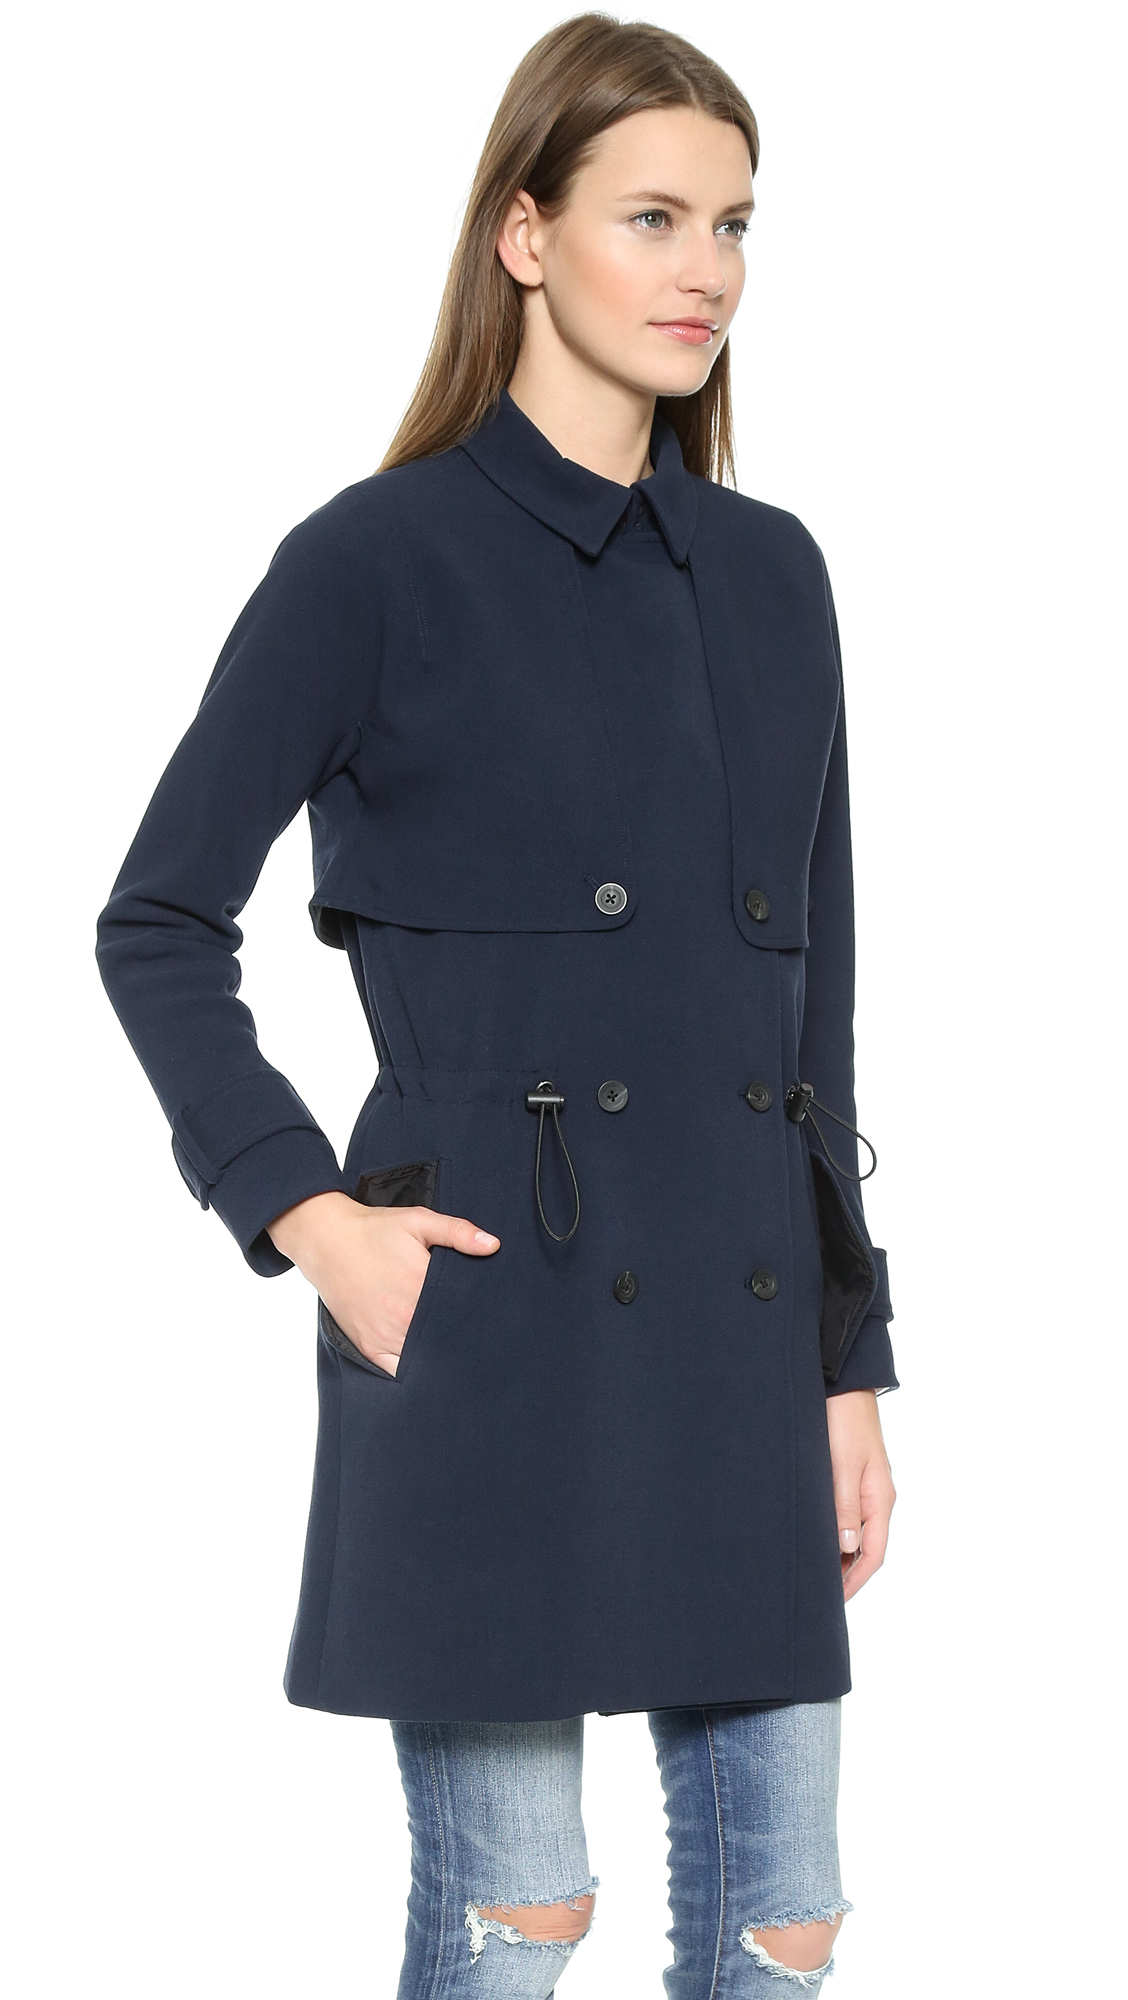 Lyst - Madewell Drapery Trench Coat - Night Vision in Blue